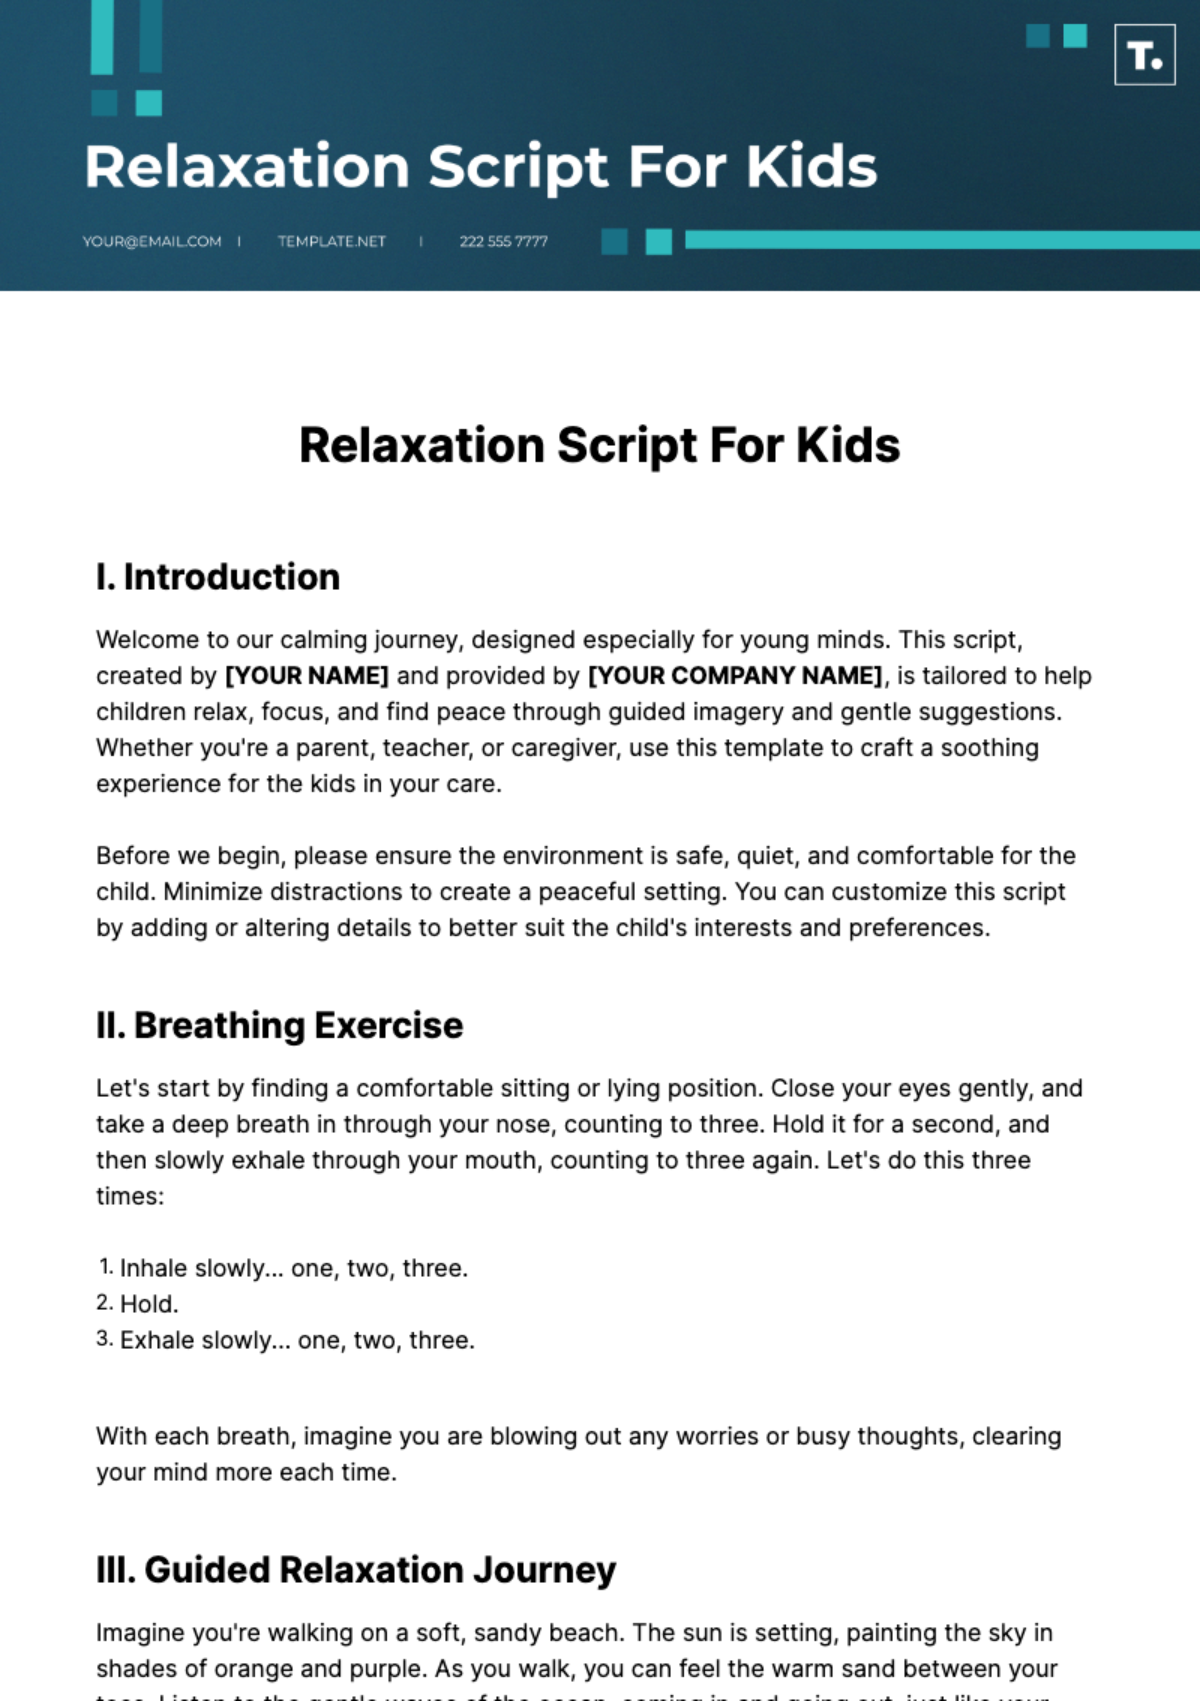 Relaxation Script For Kids Template